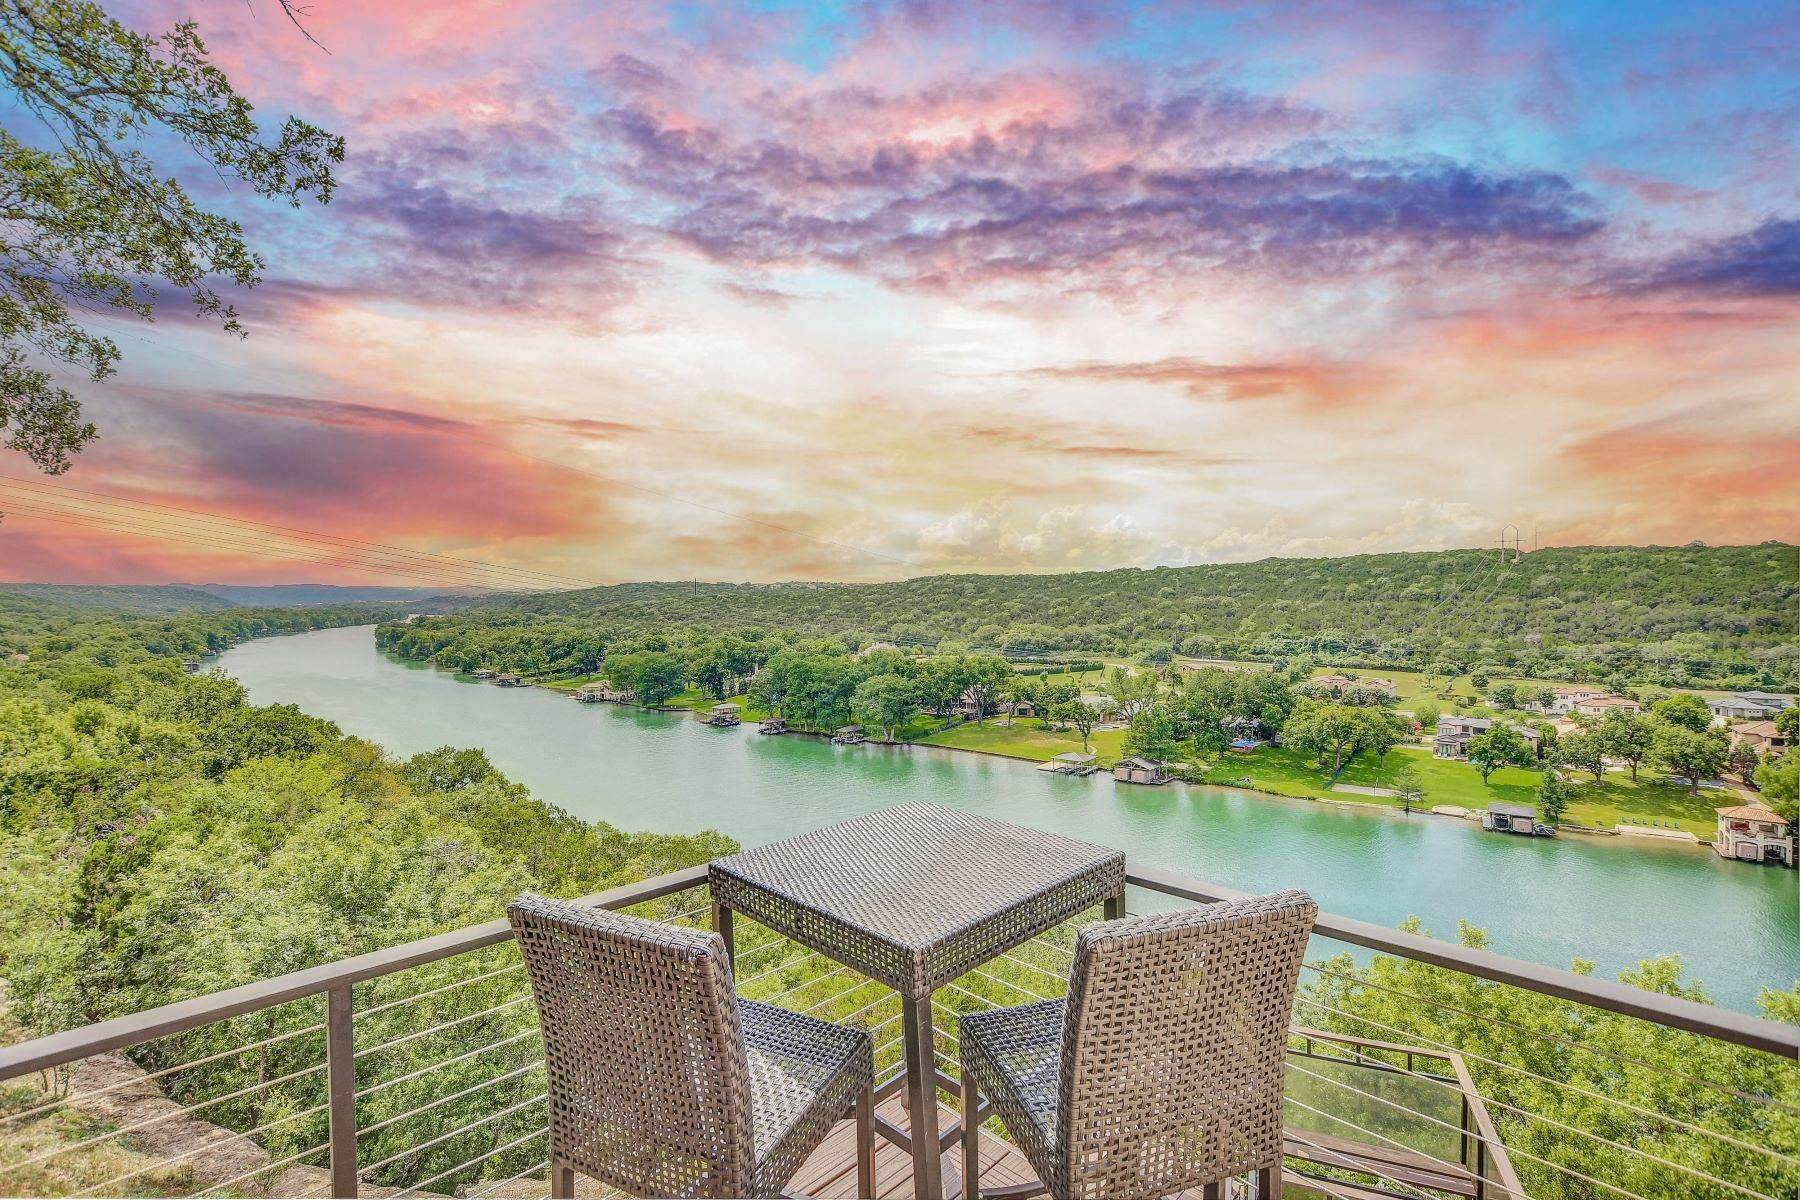 Property for Sale at The Overlook of Lake Austin 1904 Lauranne Lane Austin, Texas 78733 United States